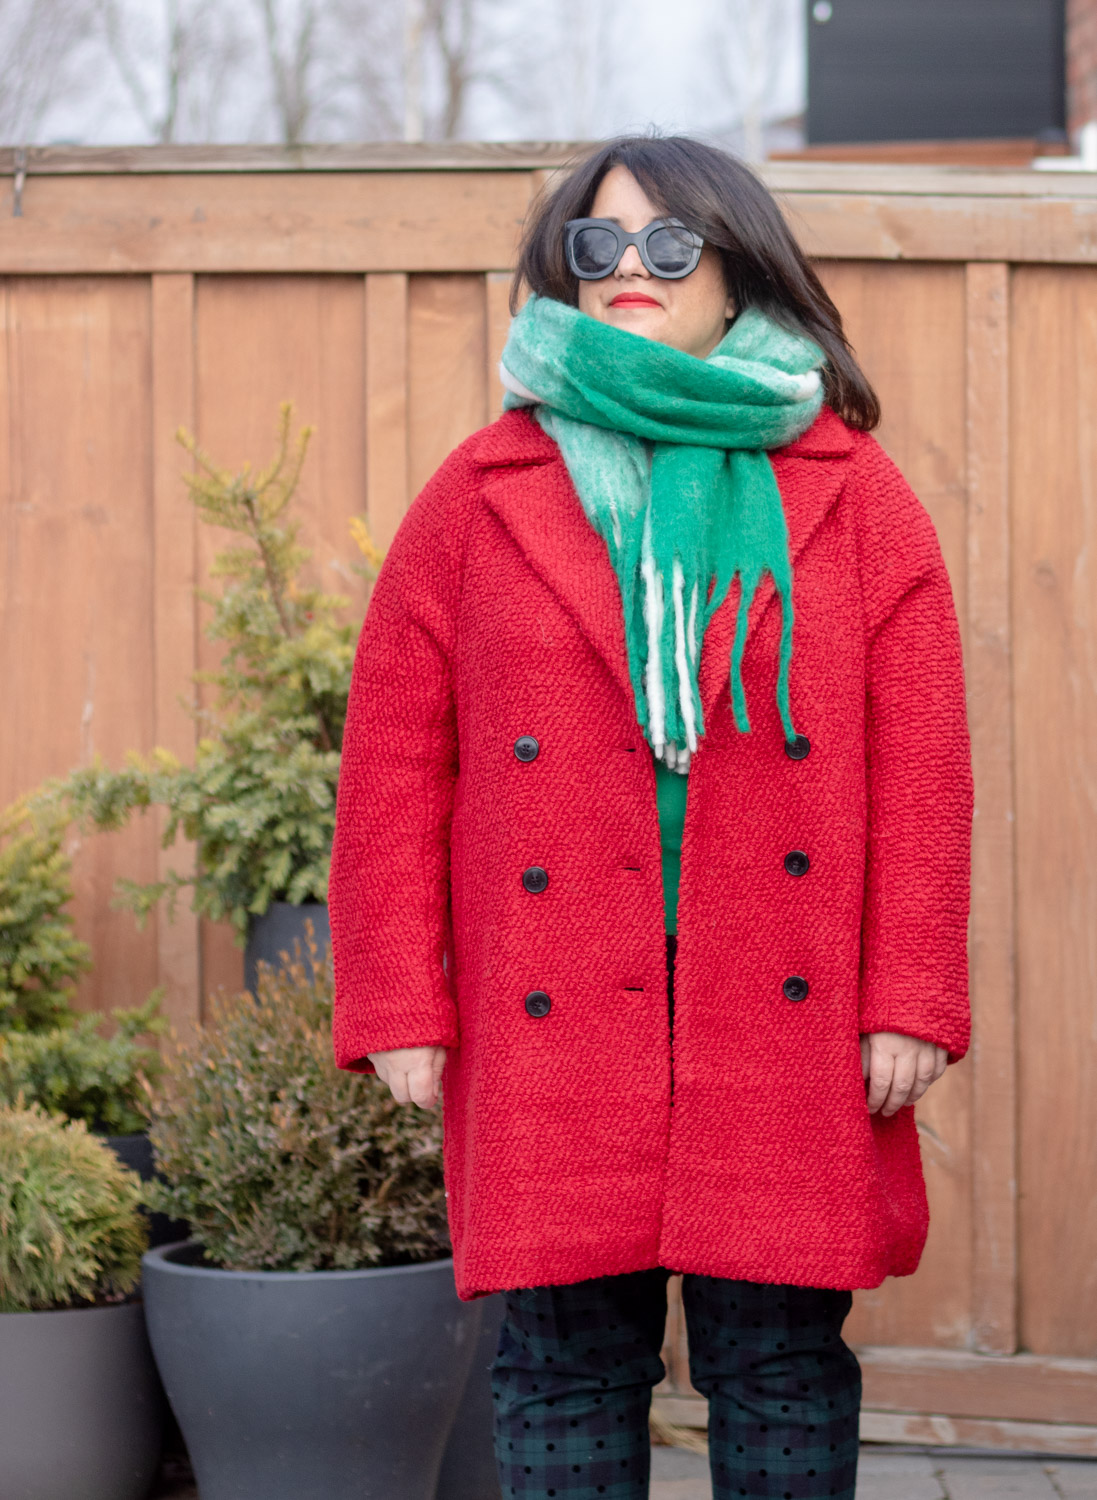 red coat, green check scarf